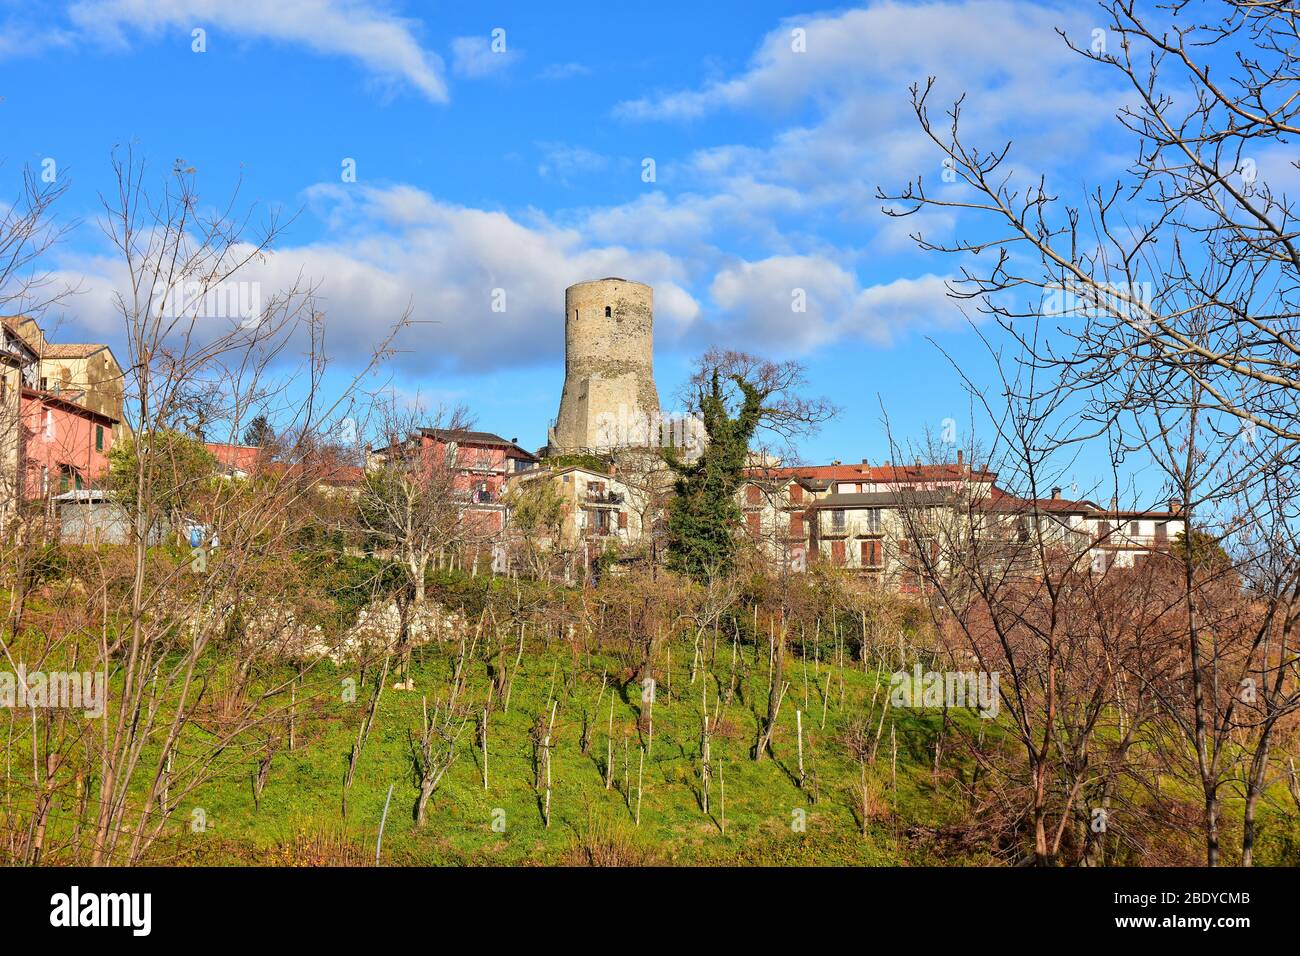 View of the houses of Summonte, a town in the province of Avellino, Italy Stock Photo